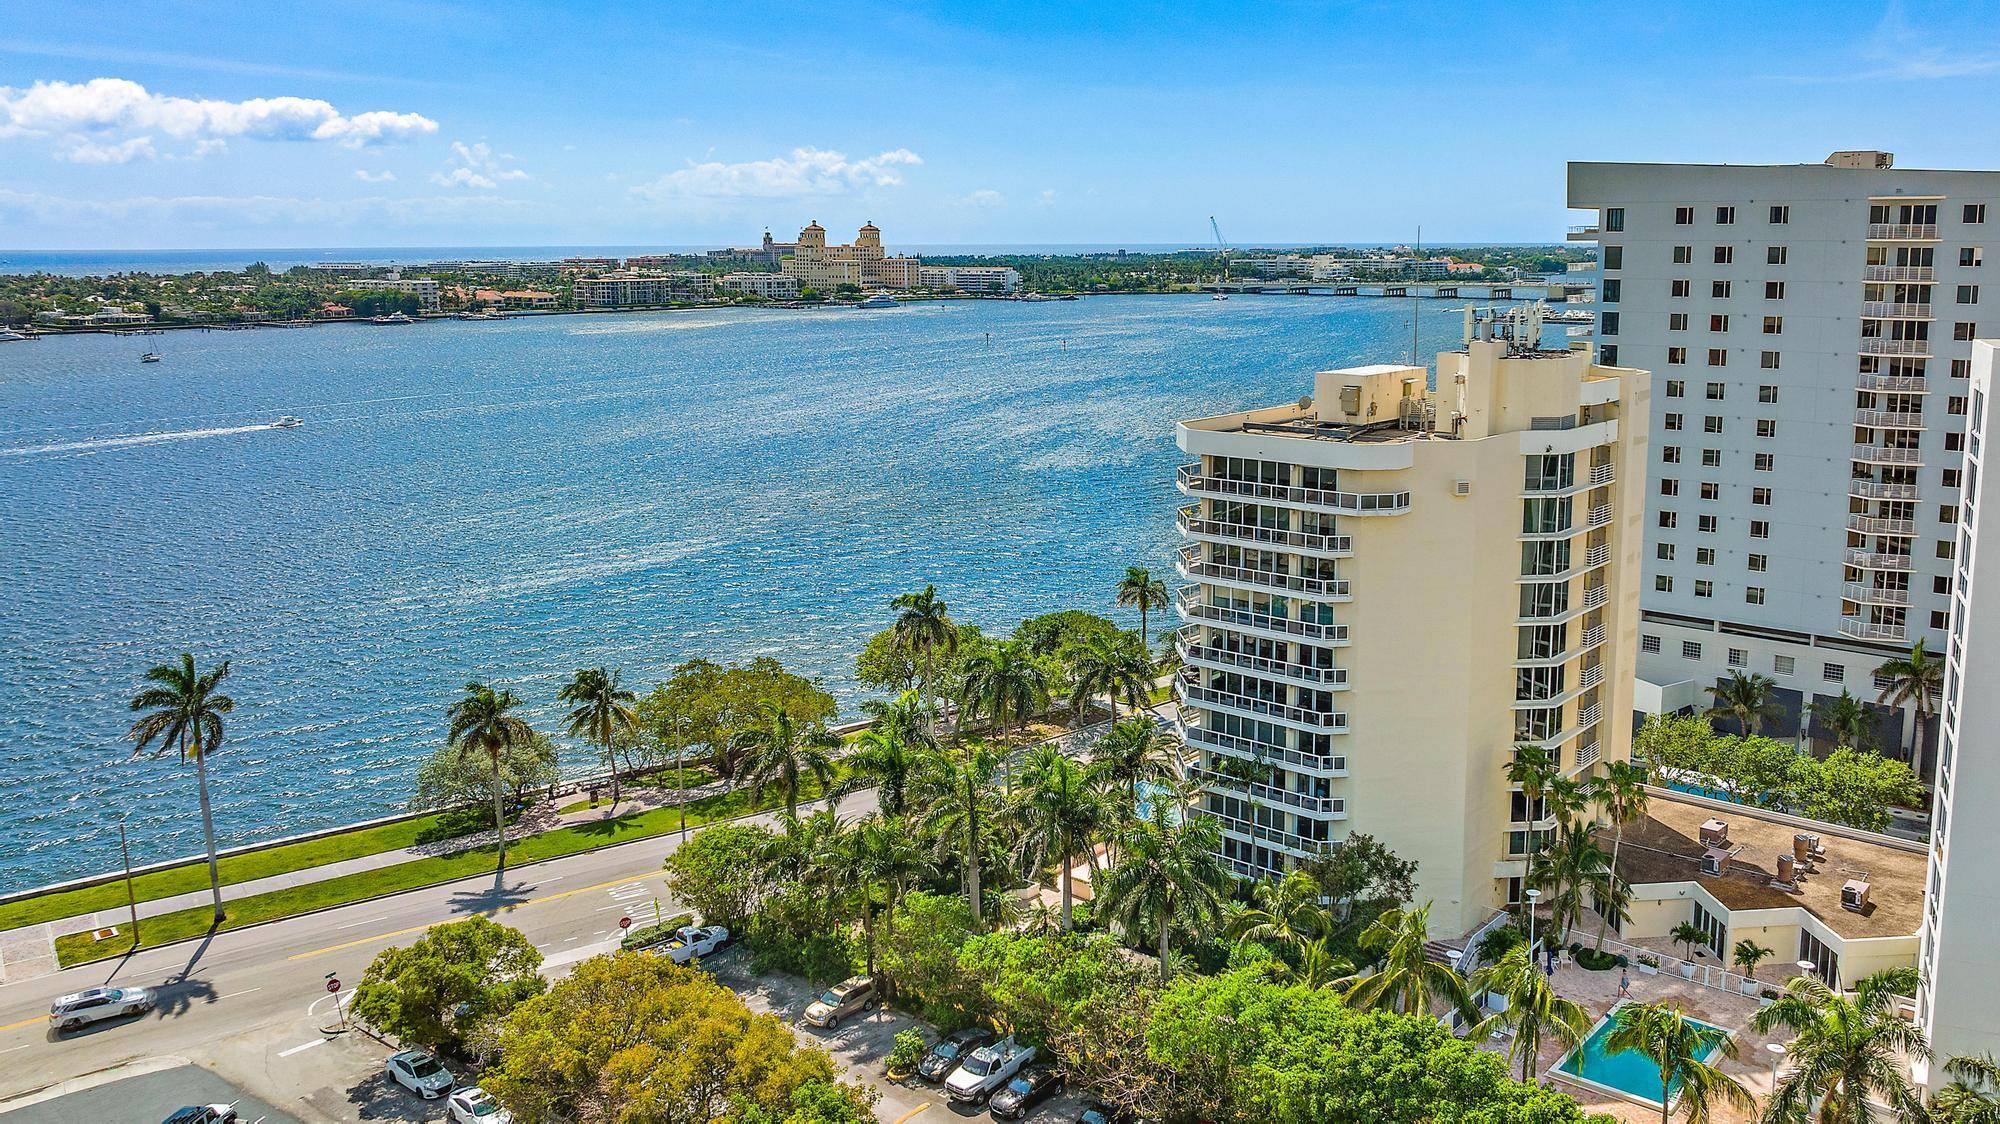 Designer furnishings, professionally decorated interiors, 100 feet of floor to ceiling glass and glorious views of the intracoastal waterway and Palm Beach awaits in this light and bright sprawling apartment.